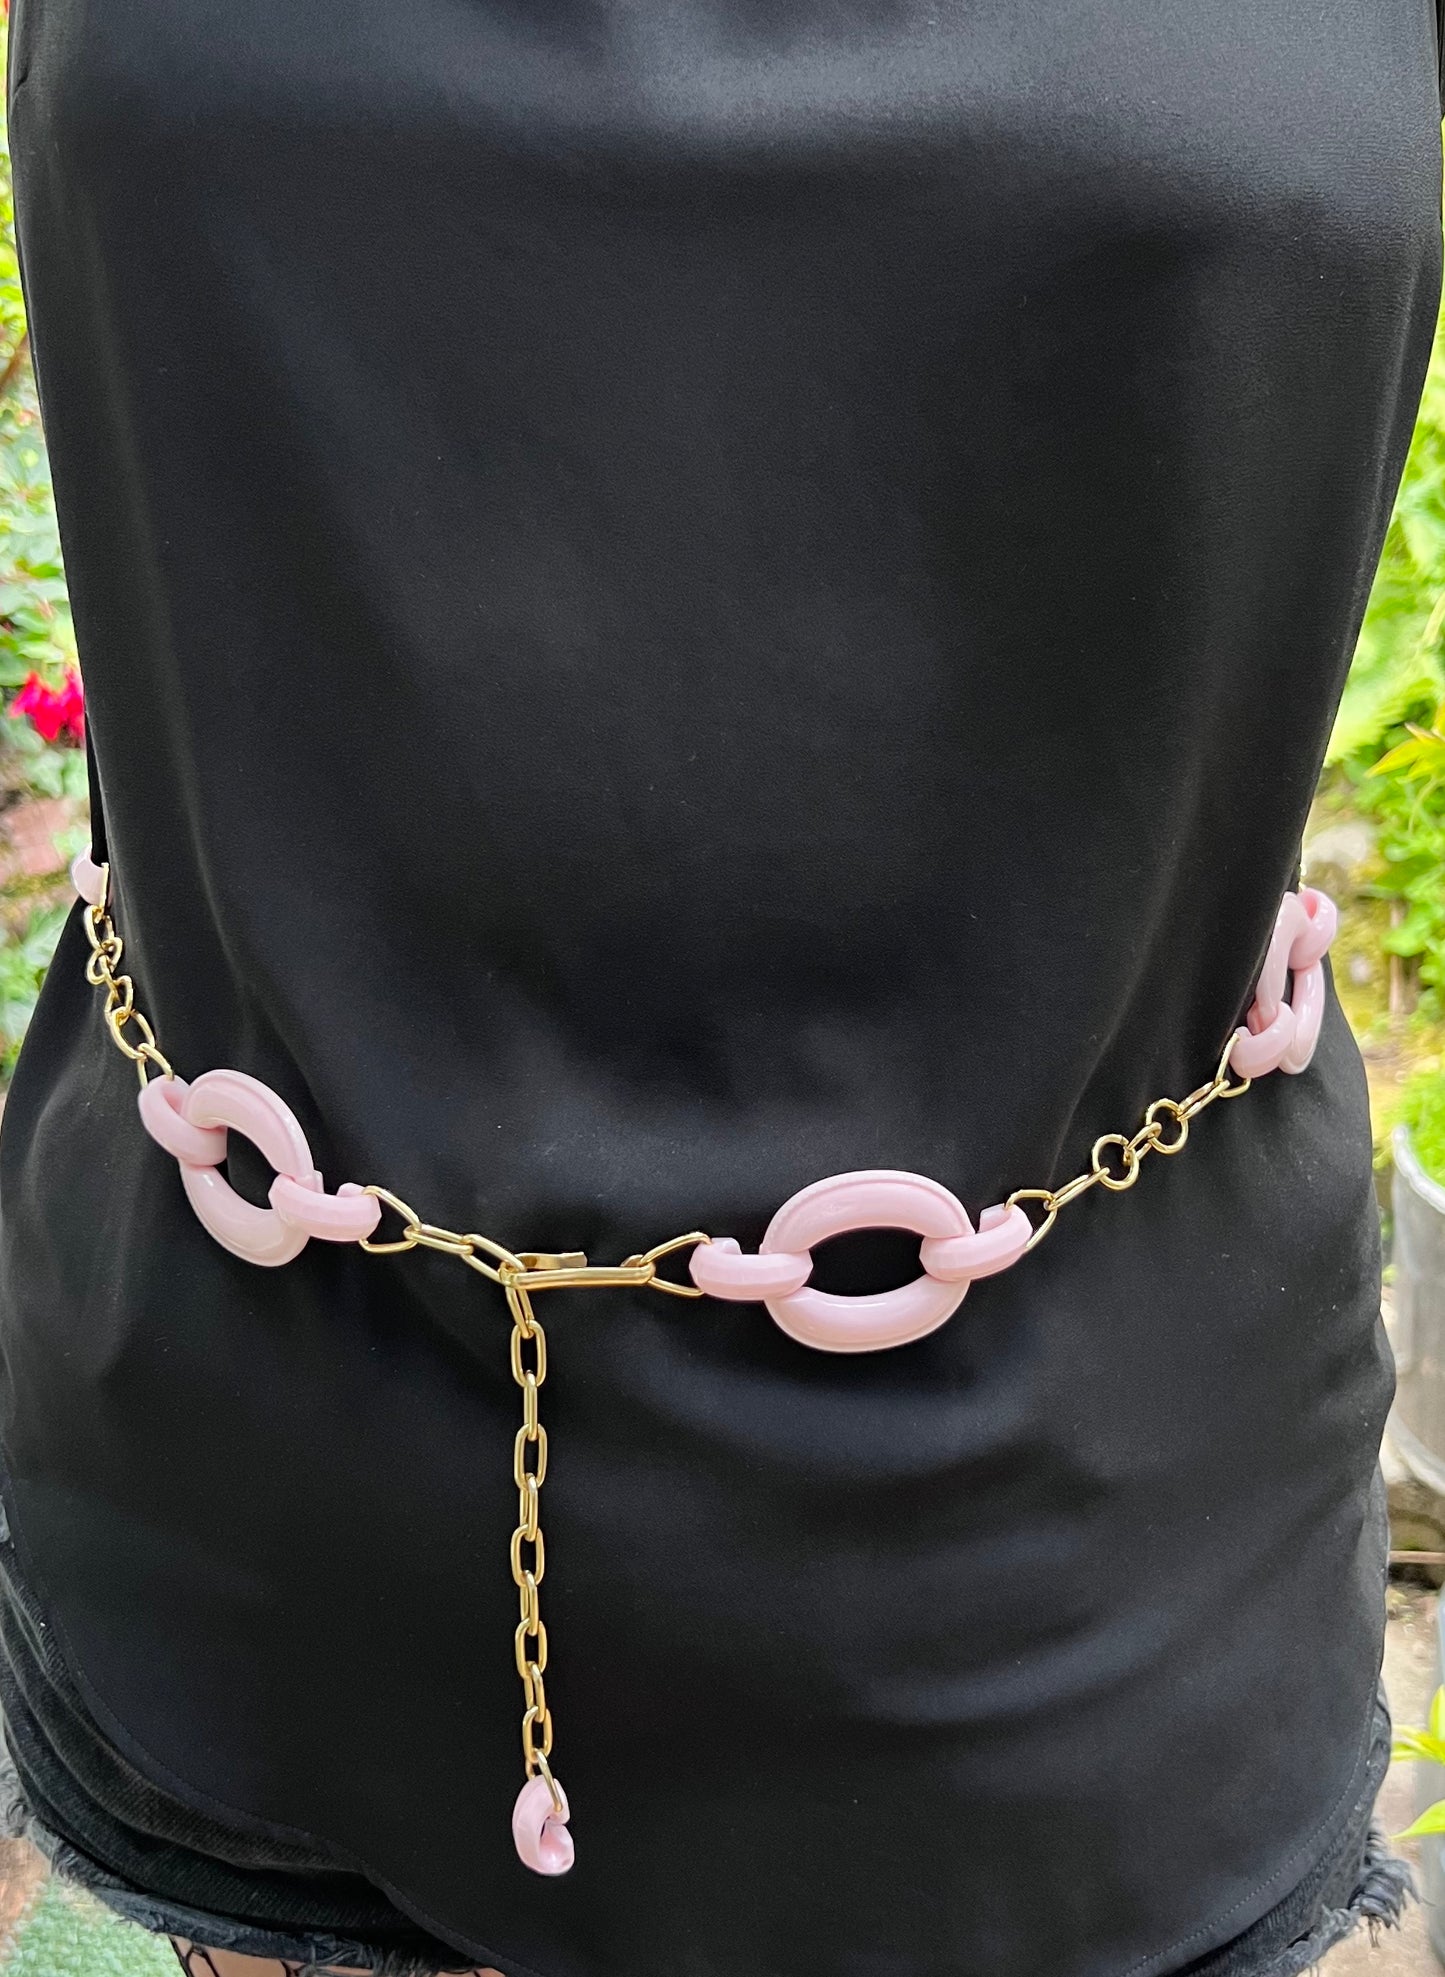 Confident and Colourful 1950s / 60s Chain Belt - 33-40"